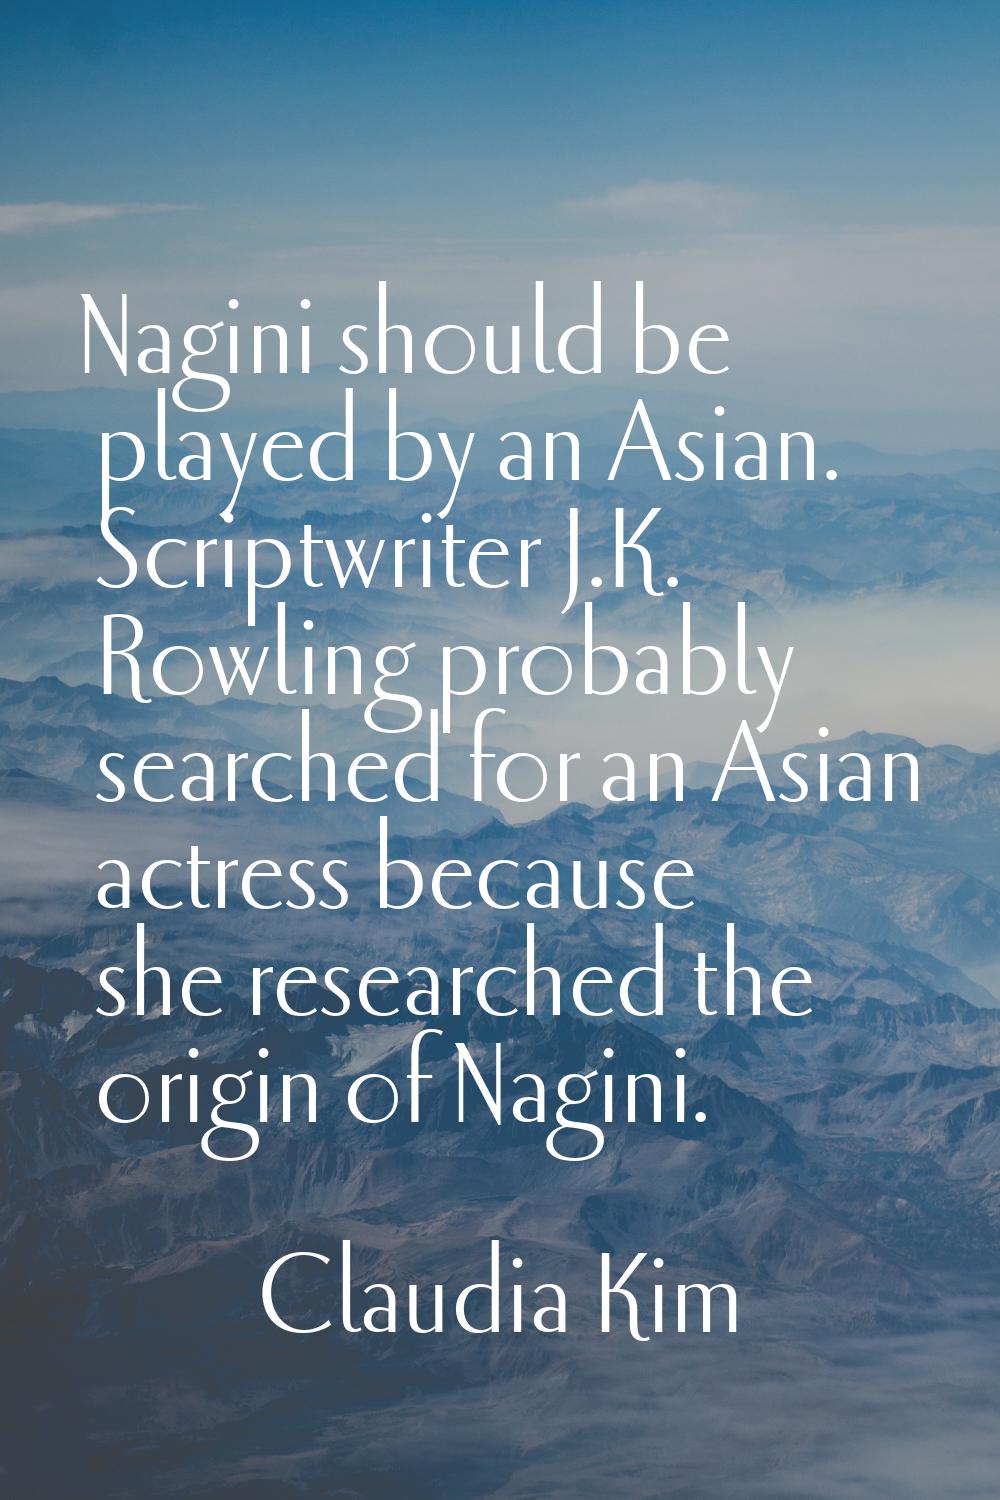 Nagini should be played by an Asian. Scriptwriter J.K. Rowling probably searched for an Asian actre